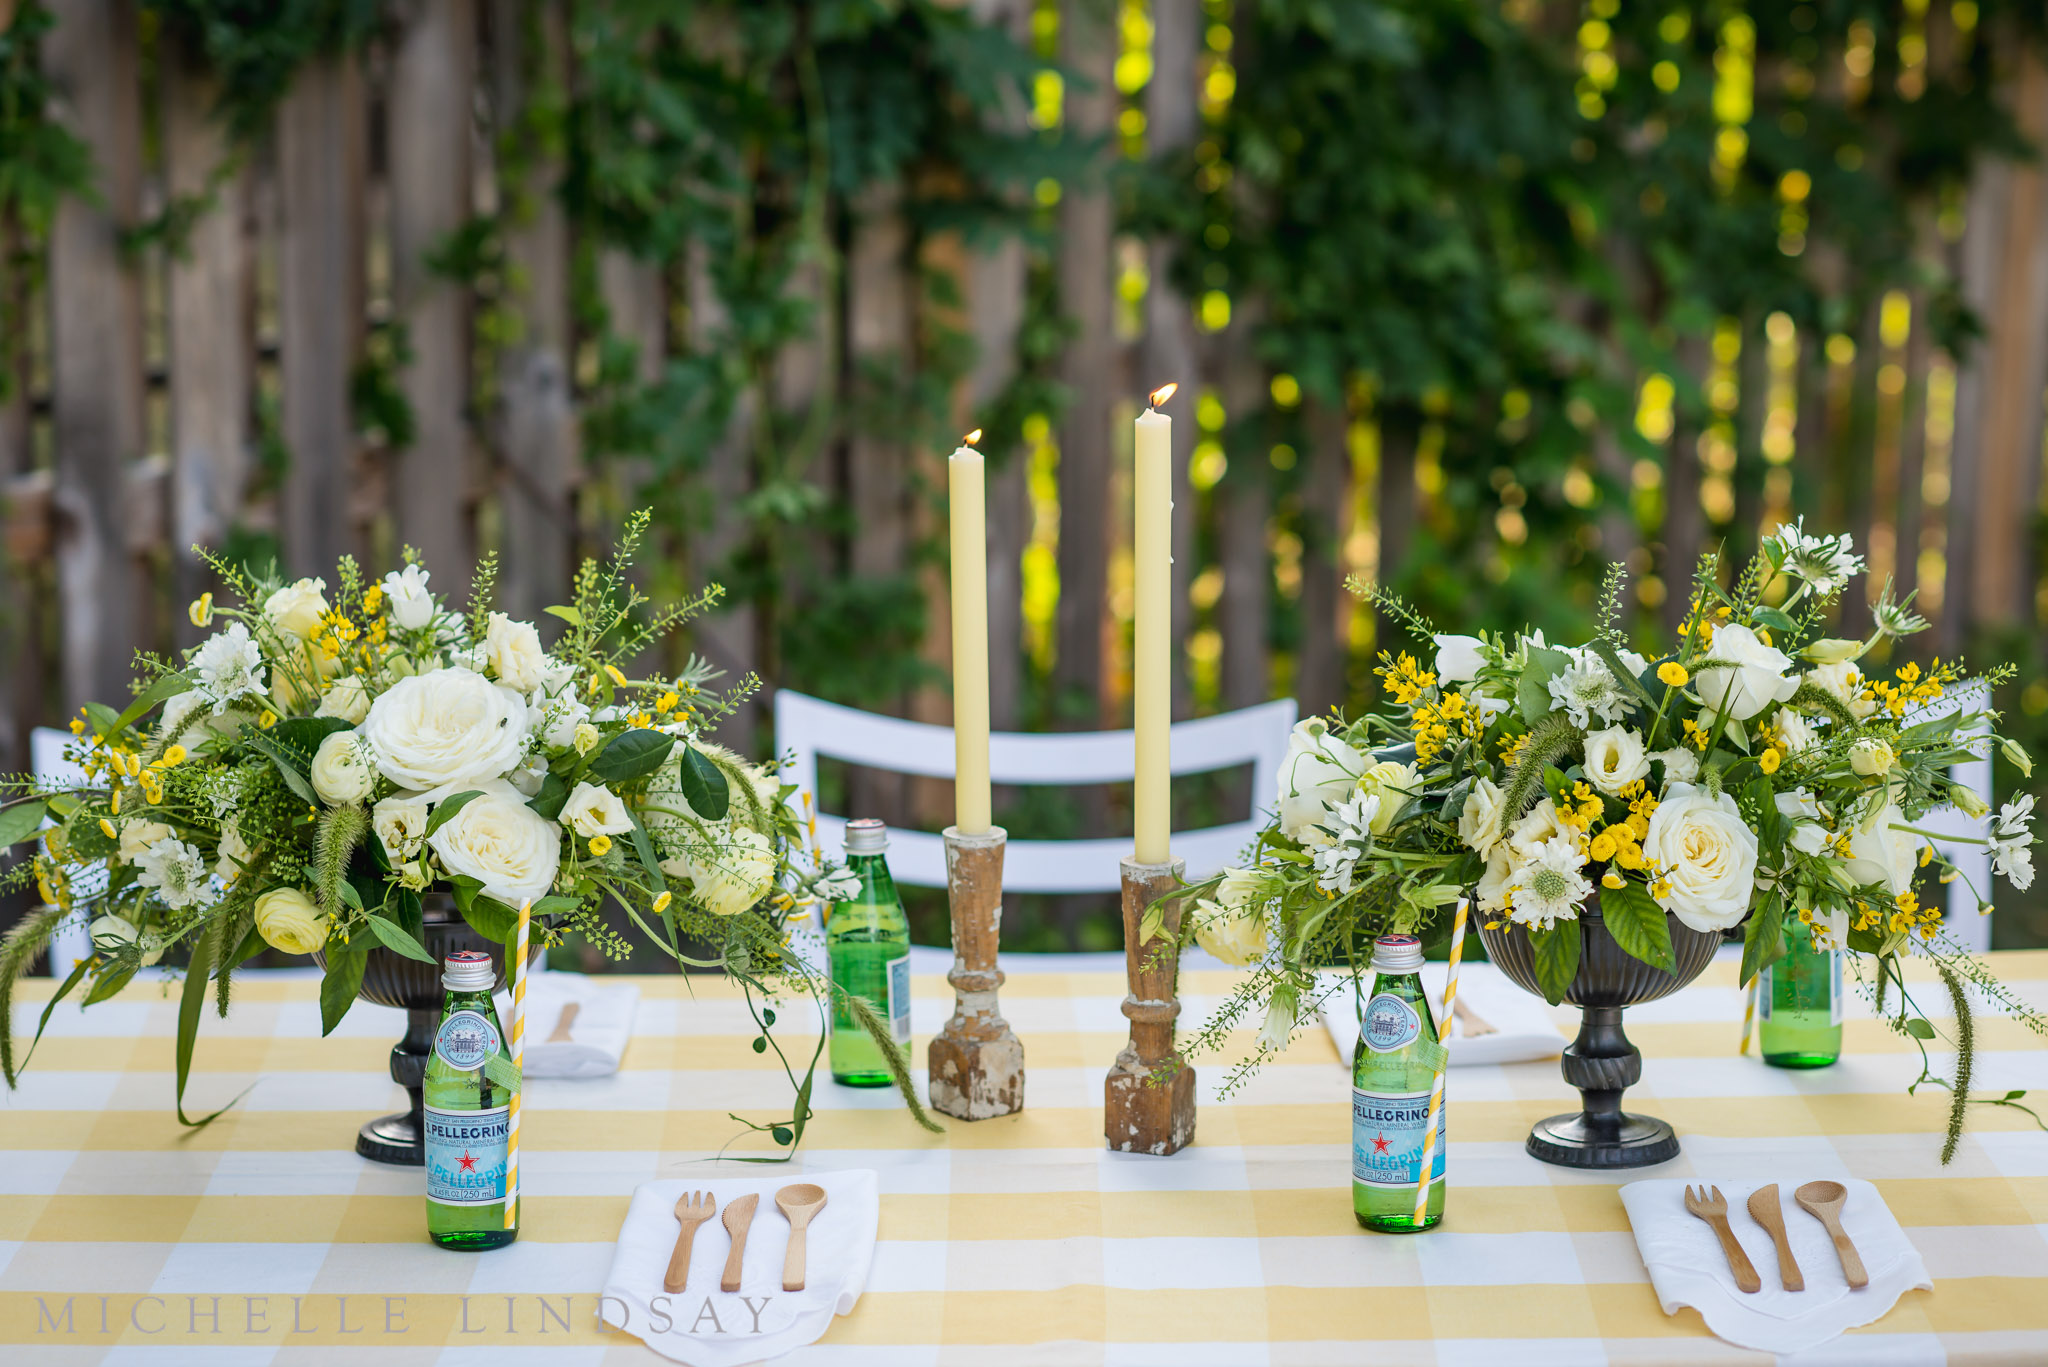 Ideas for a Ladies Fantasy Football Party Ideas | B Floral and Event Design | Michelle Lindsay Photography